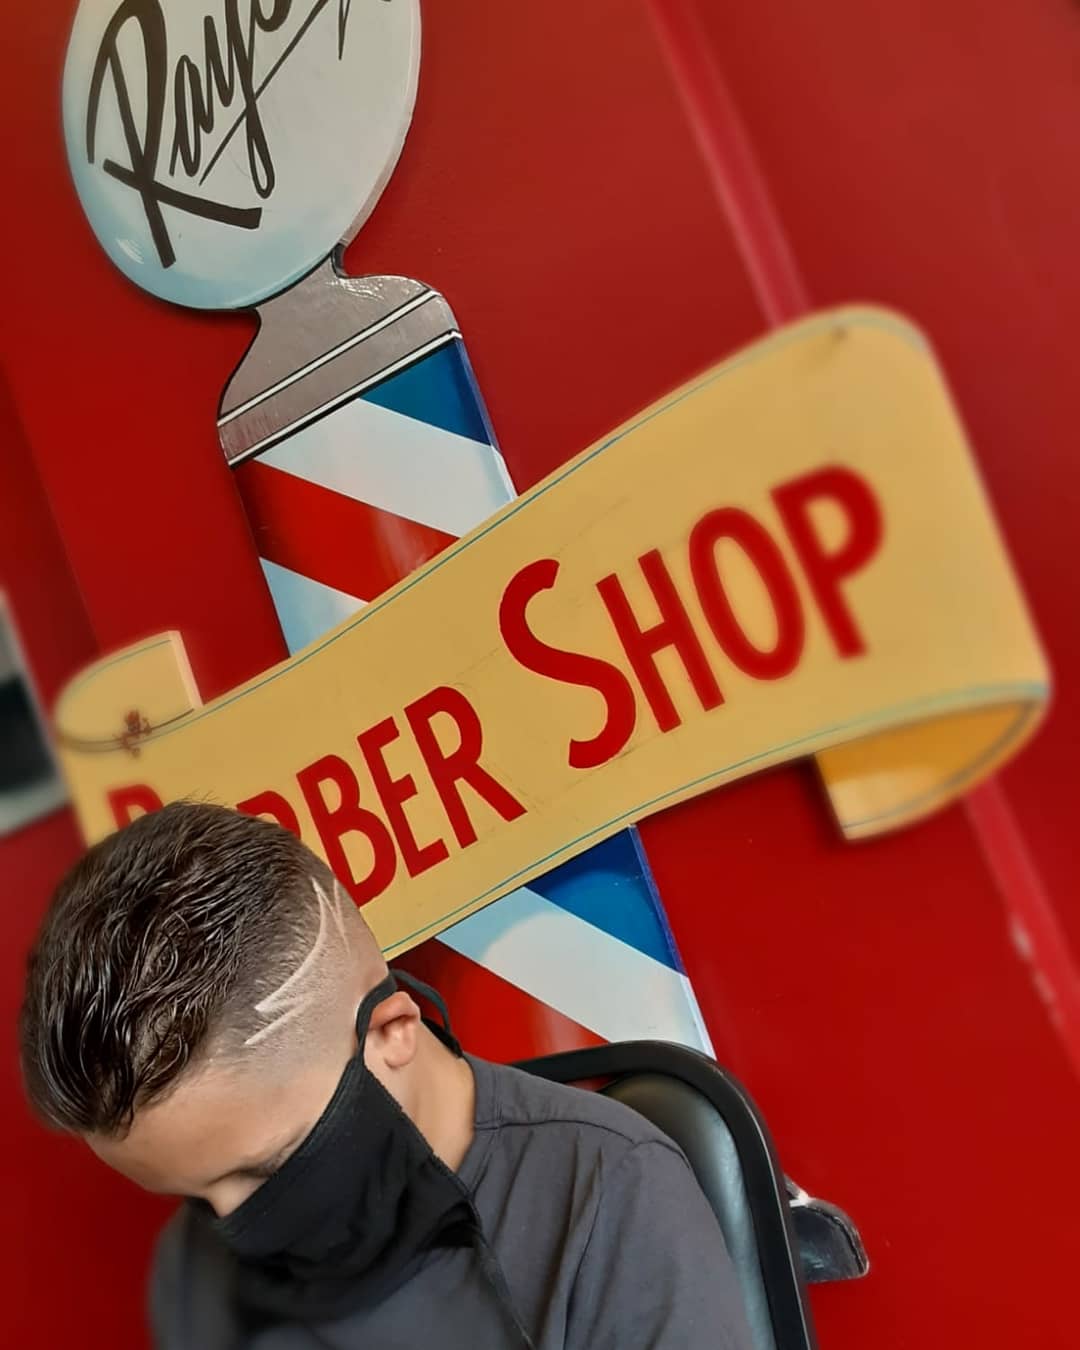 Ray's Xtreme Barber Shop